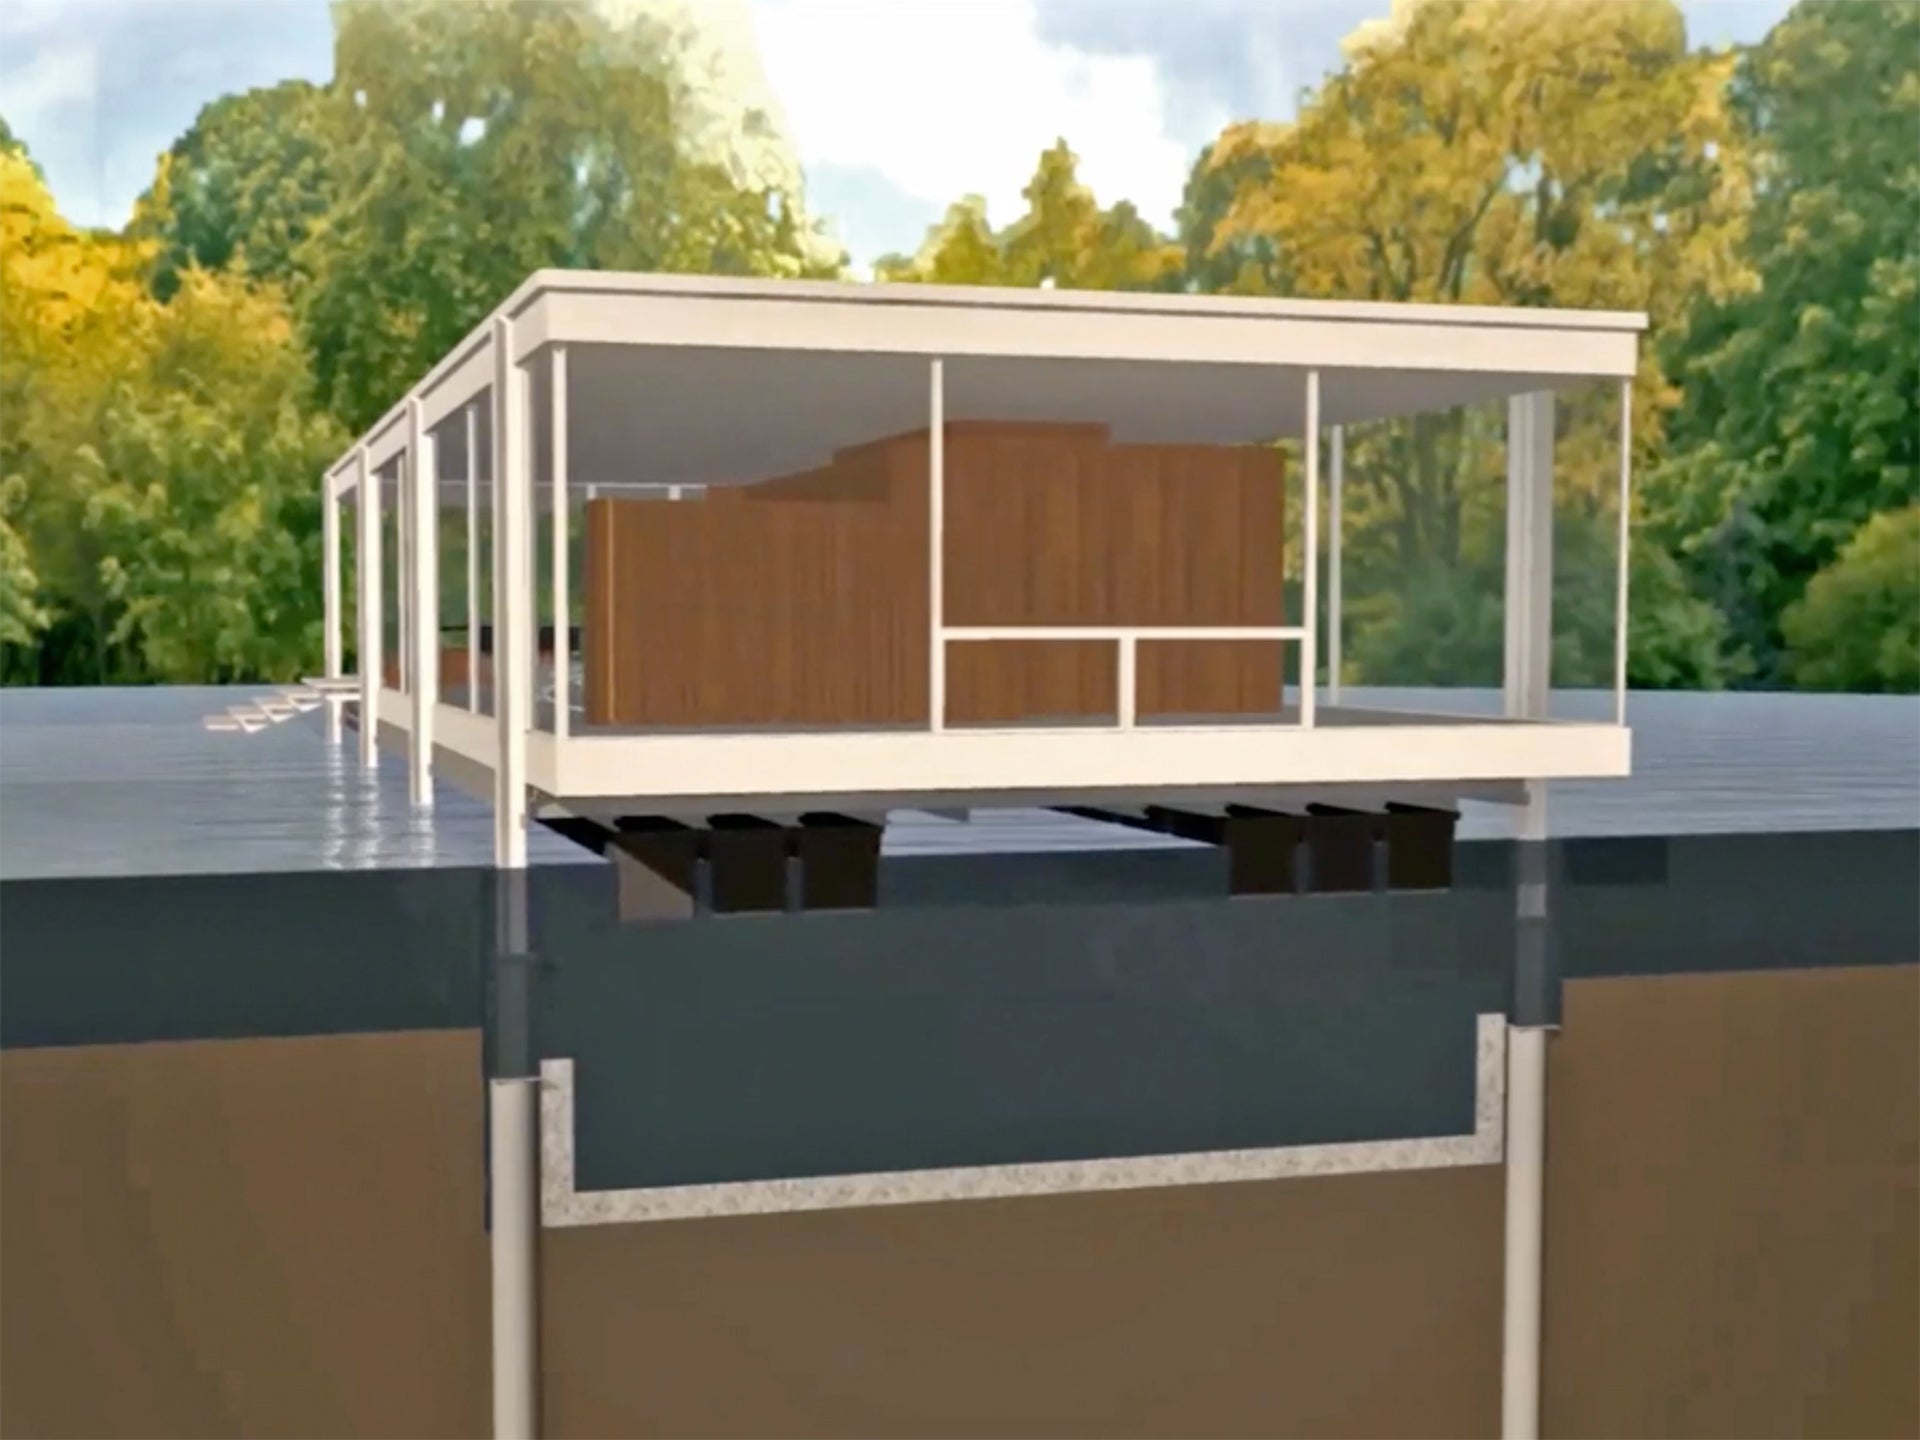 Amphibious retrofit system as applied to the Farnsworth House by Ludwig Mies van der Rohe (frame from animation) 